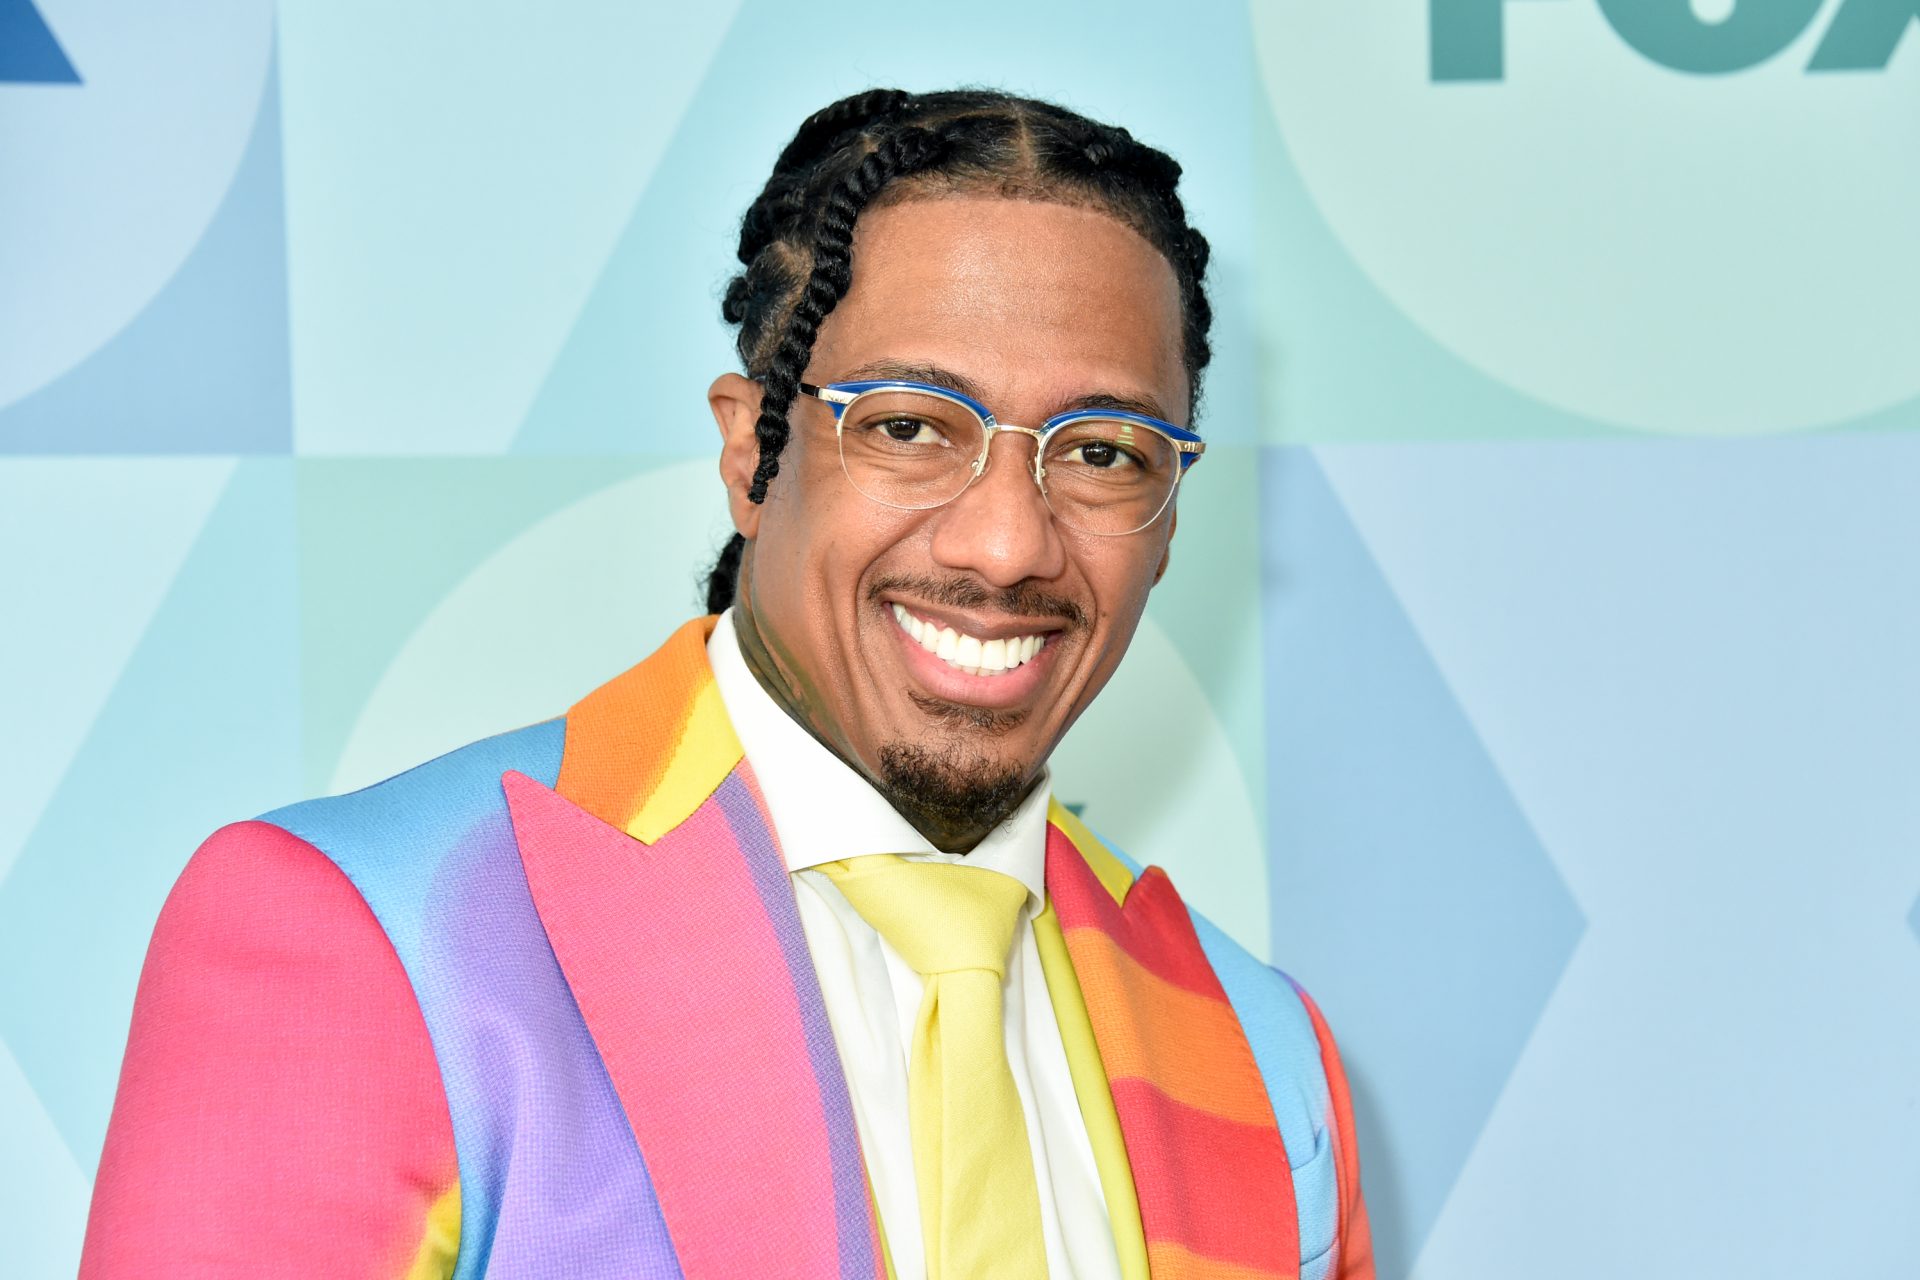 Nick Cannon, Mariah Carey's ex, insured his private parts for $10 million